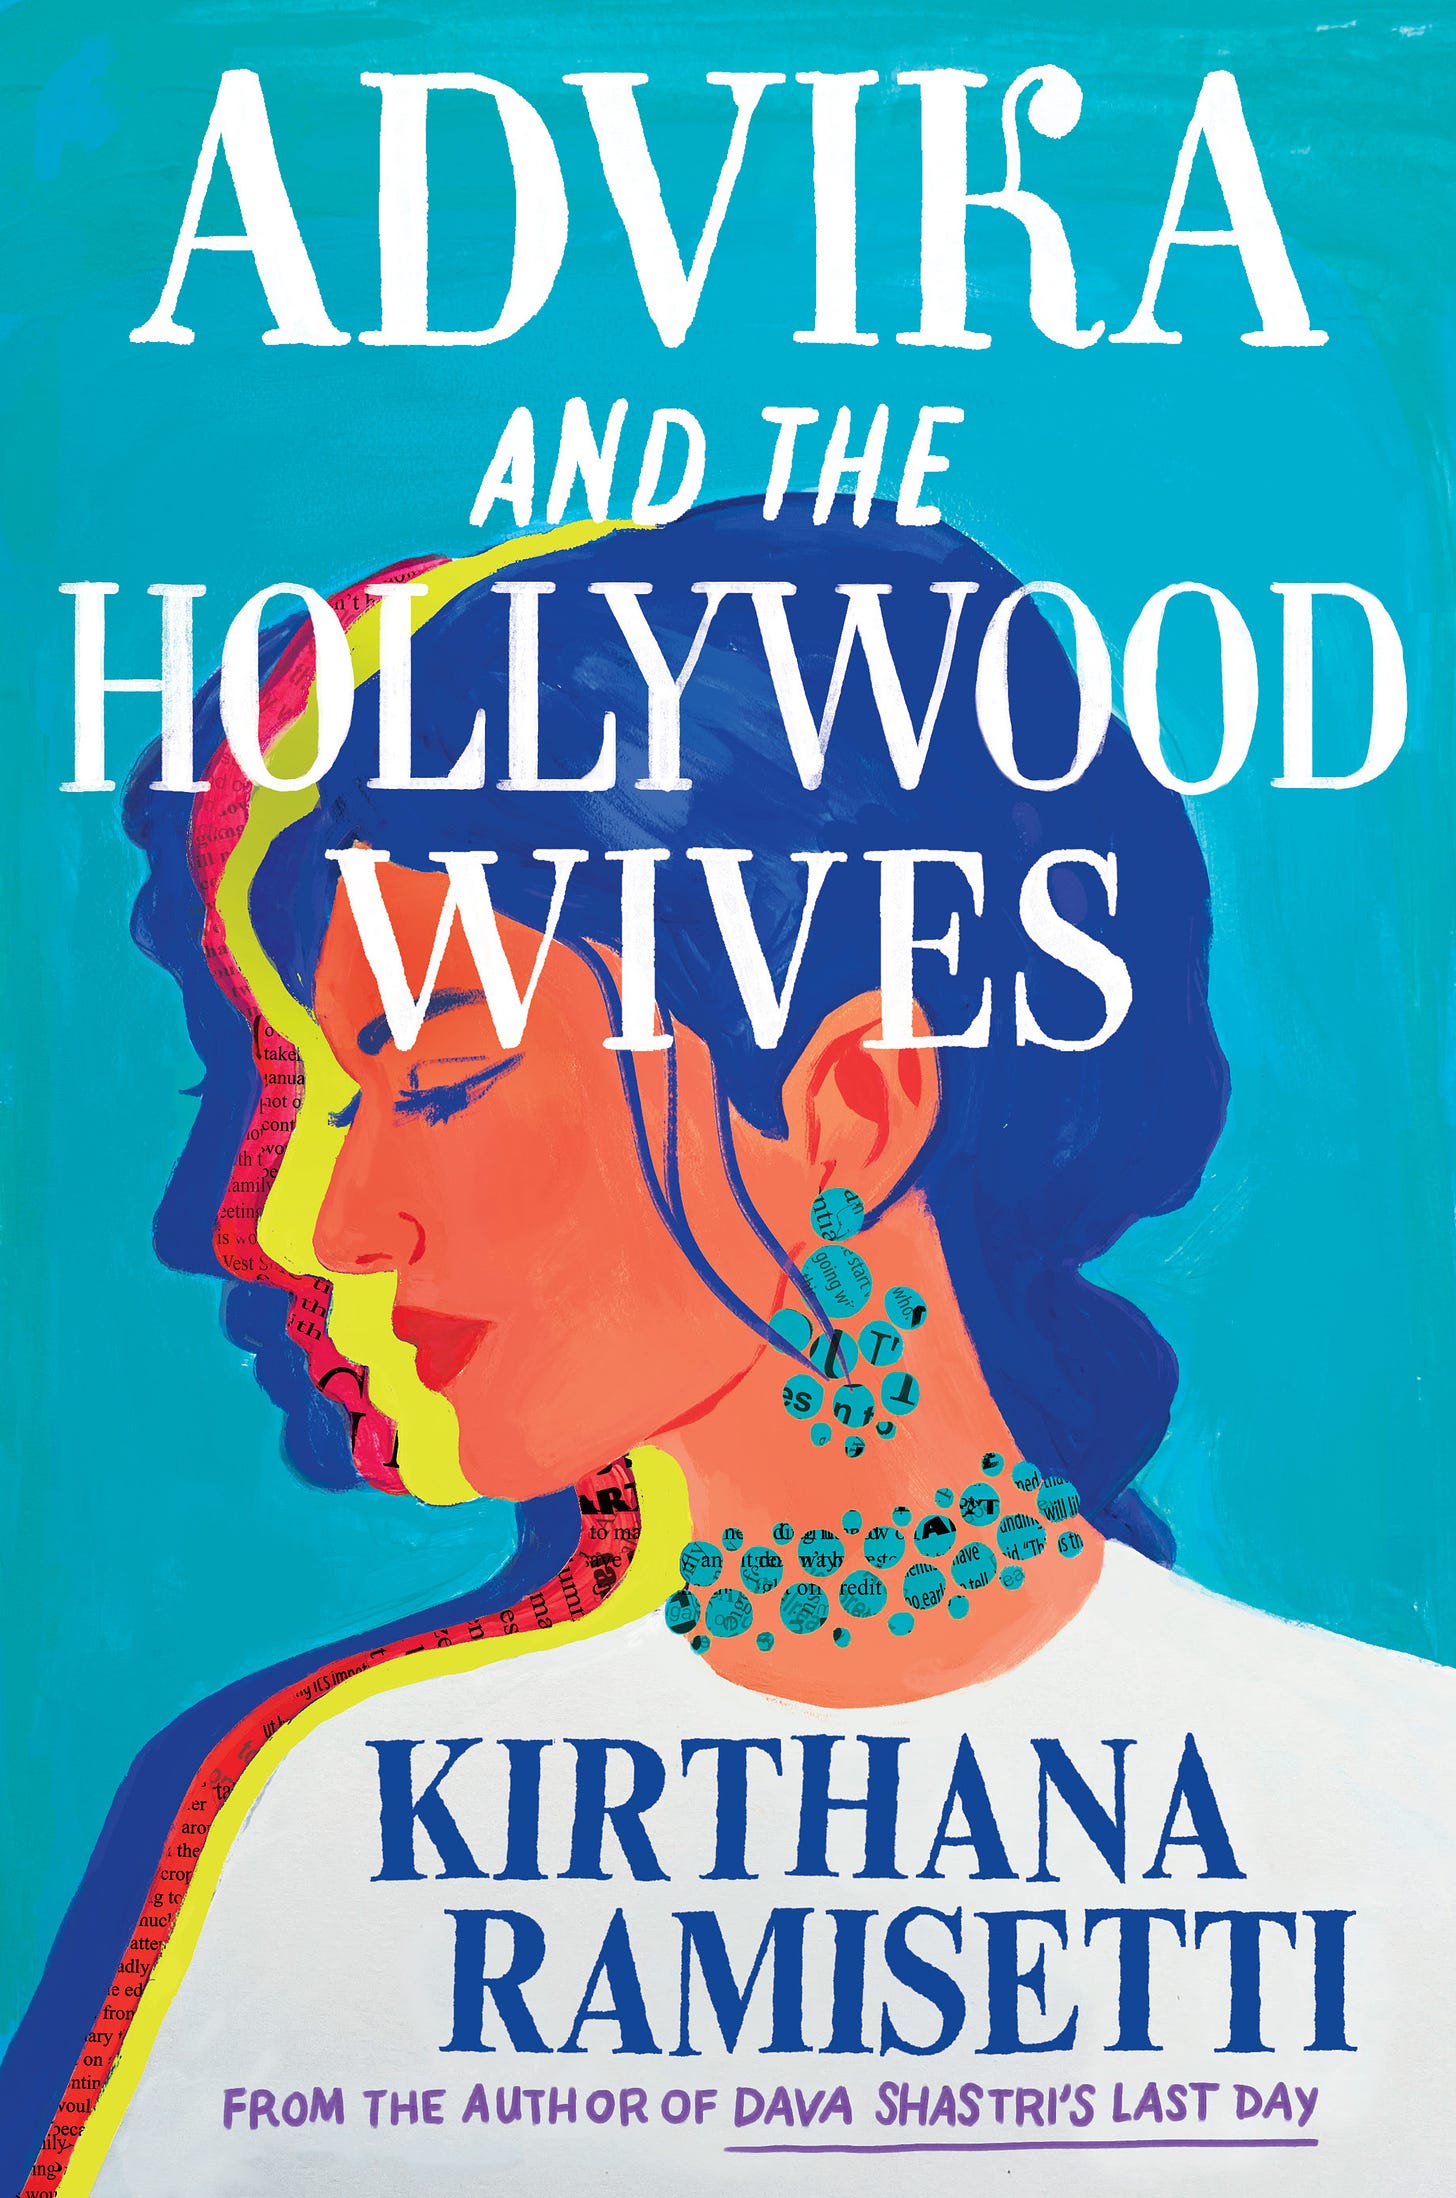 The cover of "Advika and the Hollywood Wives"